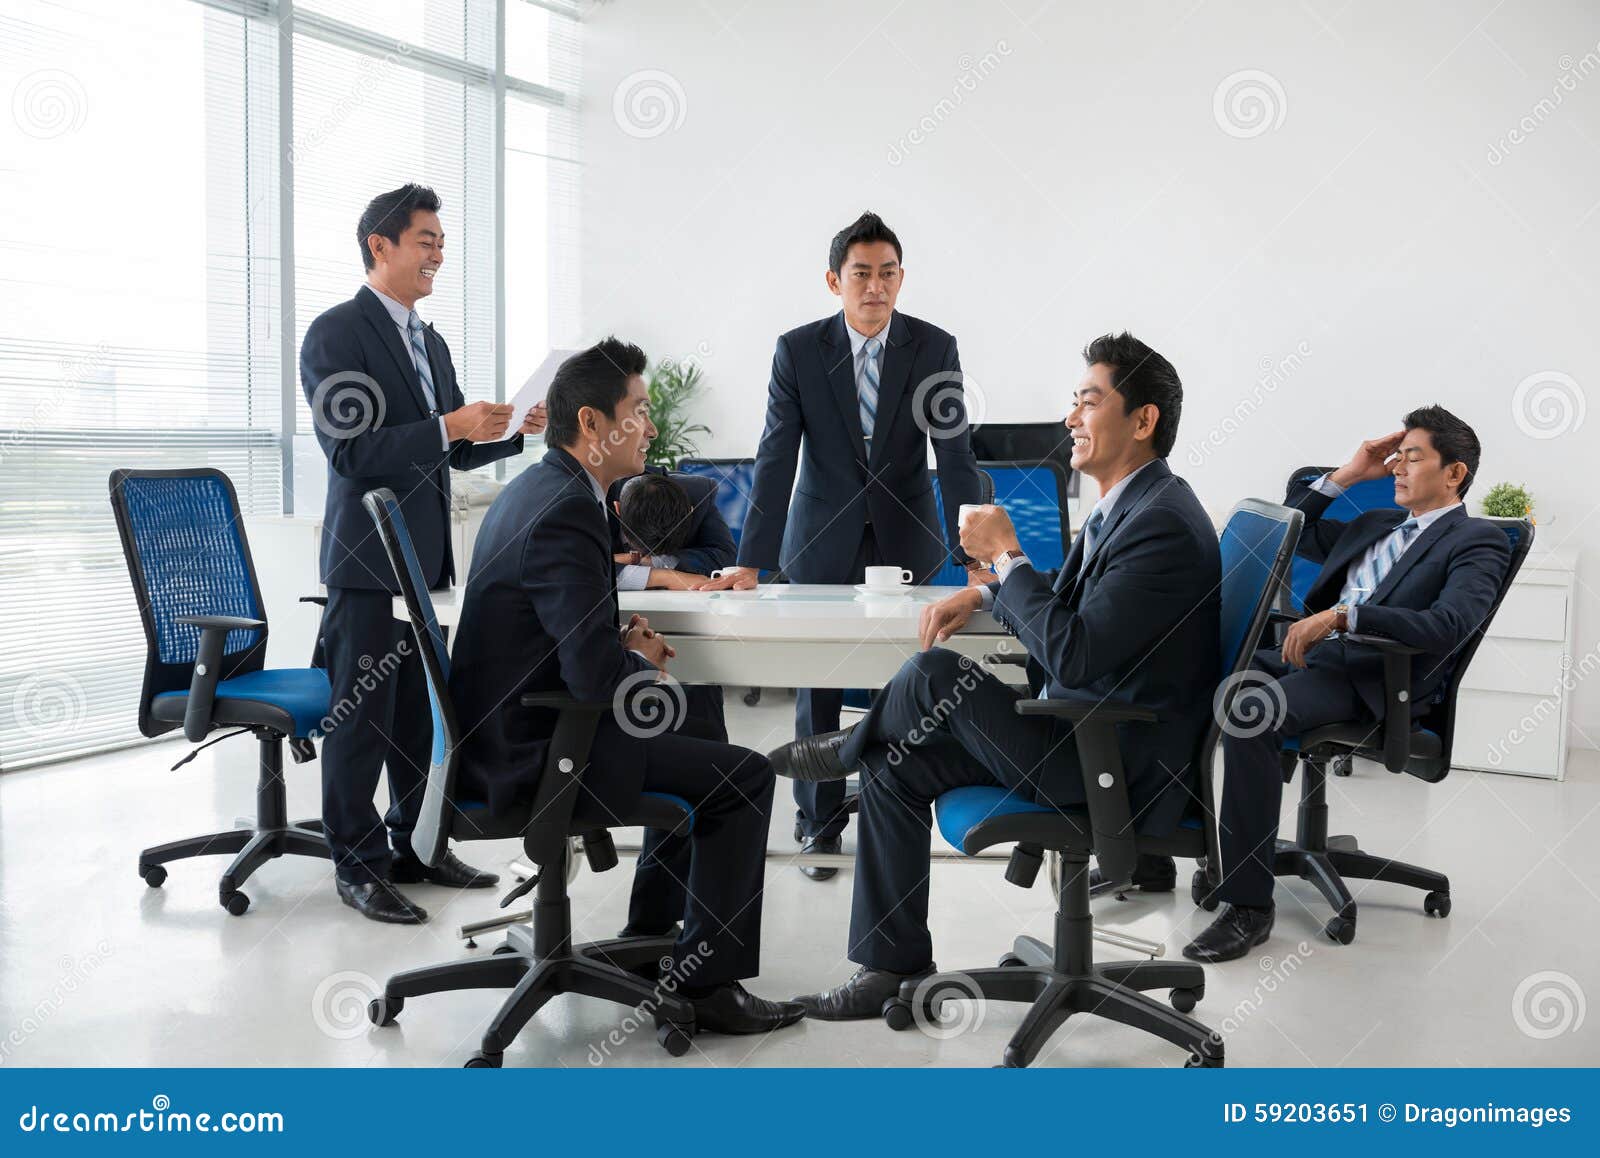 Briefing stock image. Image of middleaged, briefing, concept - 59203651